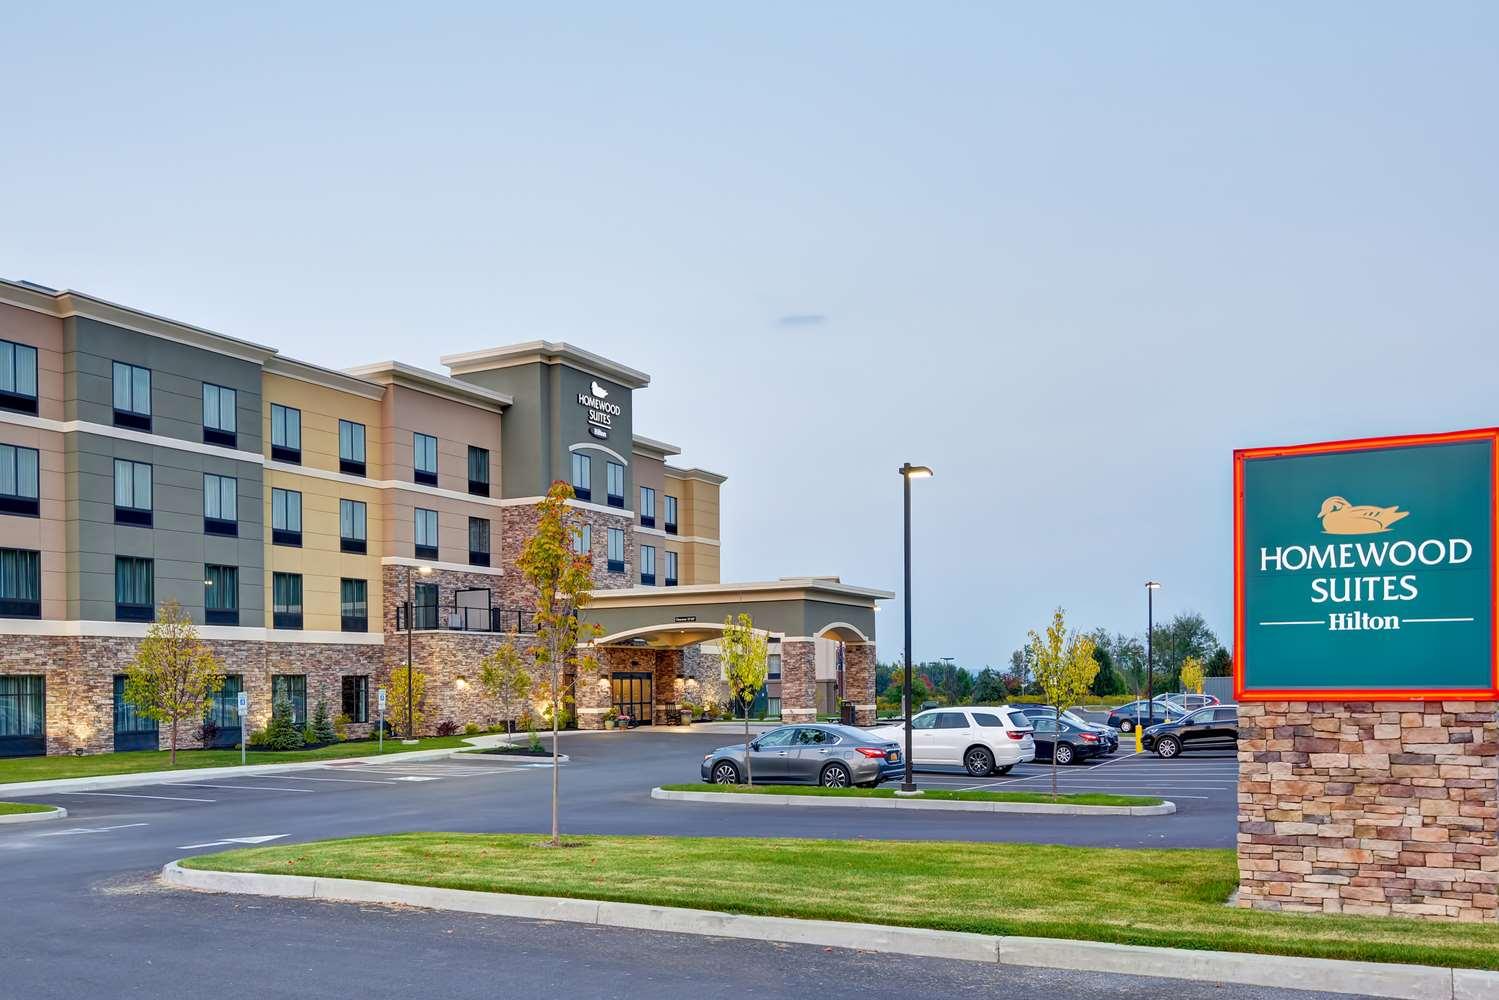 Homewood Suites By Hilton New Hartford Utica in Clinton, NY